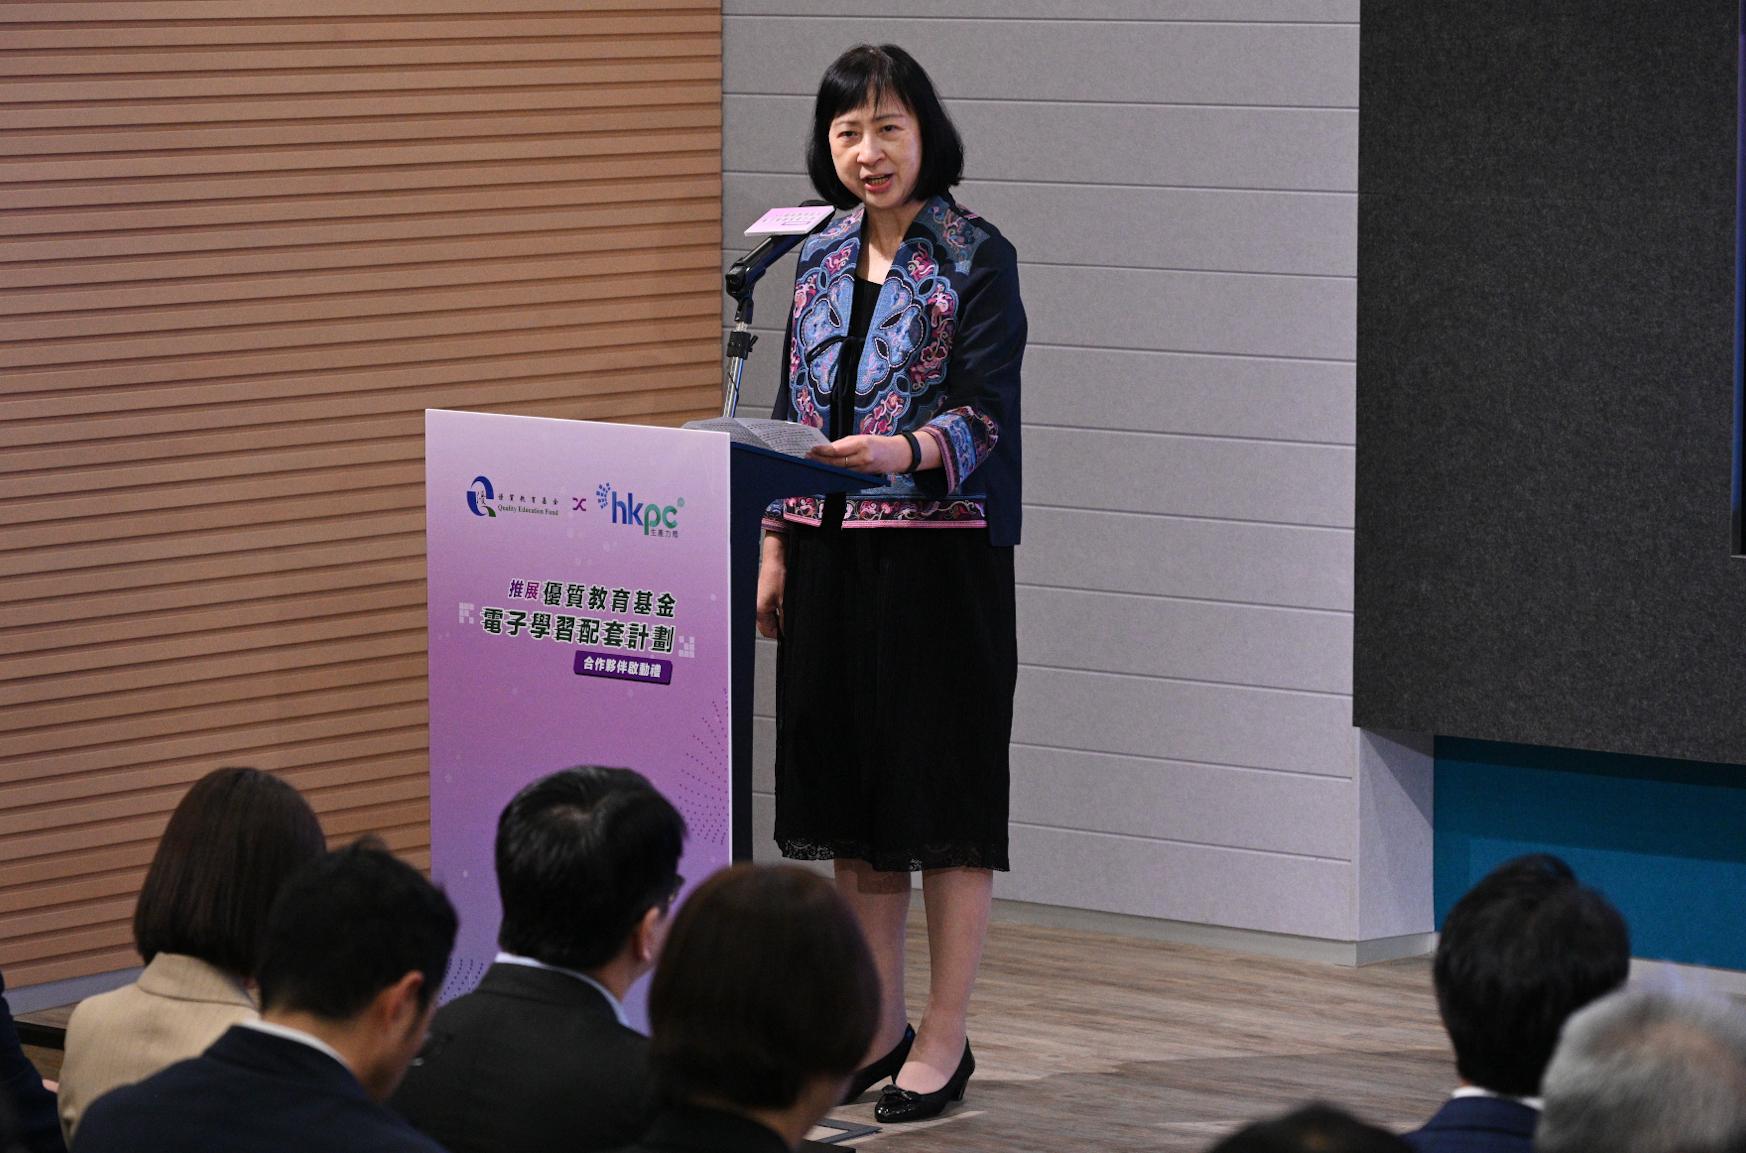 The Quality Education Fund and the Hong Kong Productivity Council held a launching ceremony for promoting the e-Learning Ancillary Facilities Programme today (July 28). Photo shows the Permanent Secretary for Education, Ms Michelle Li, speaking at the ceremony.
